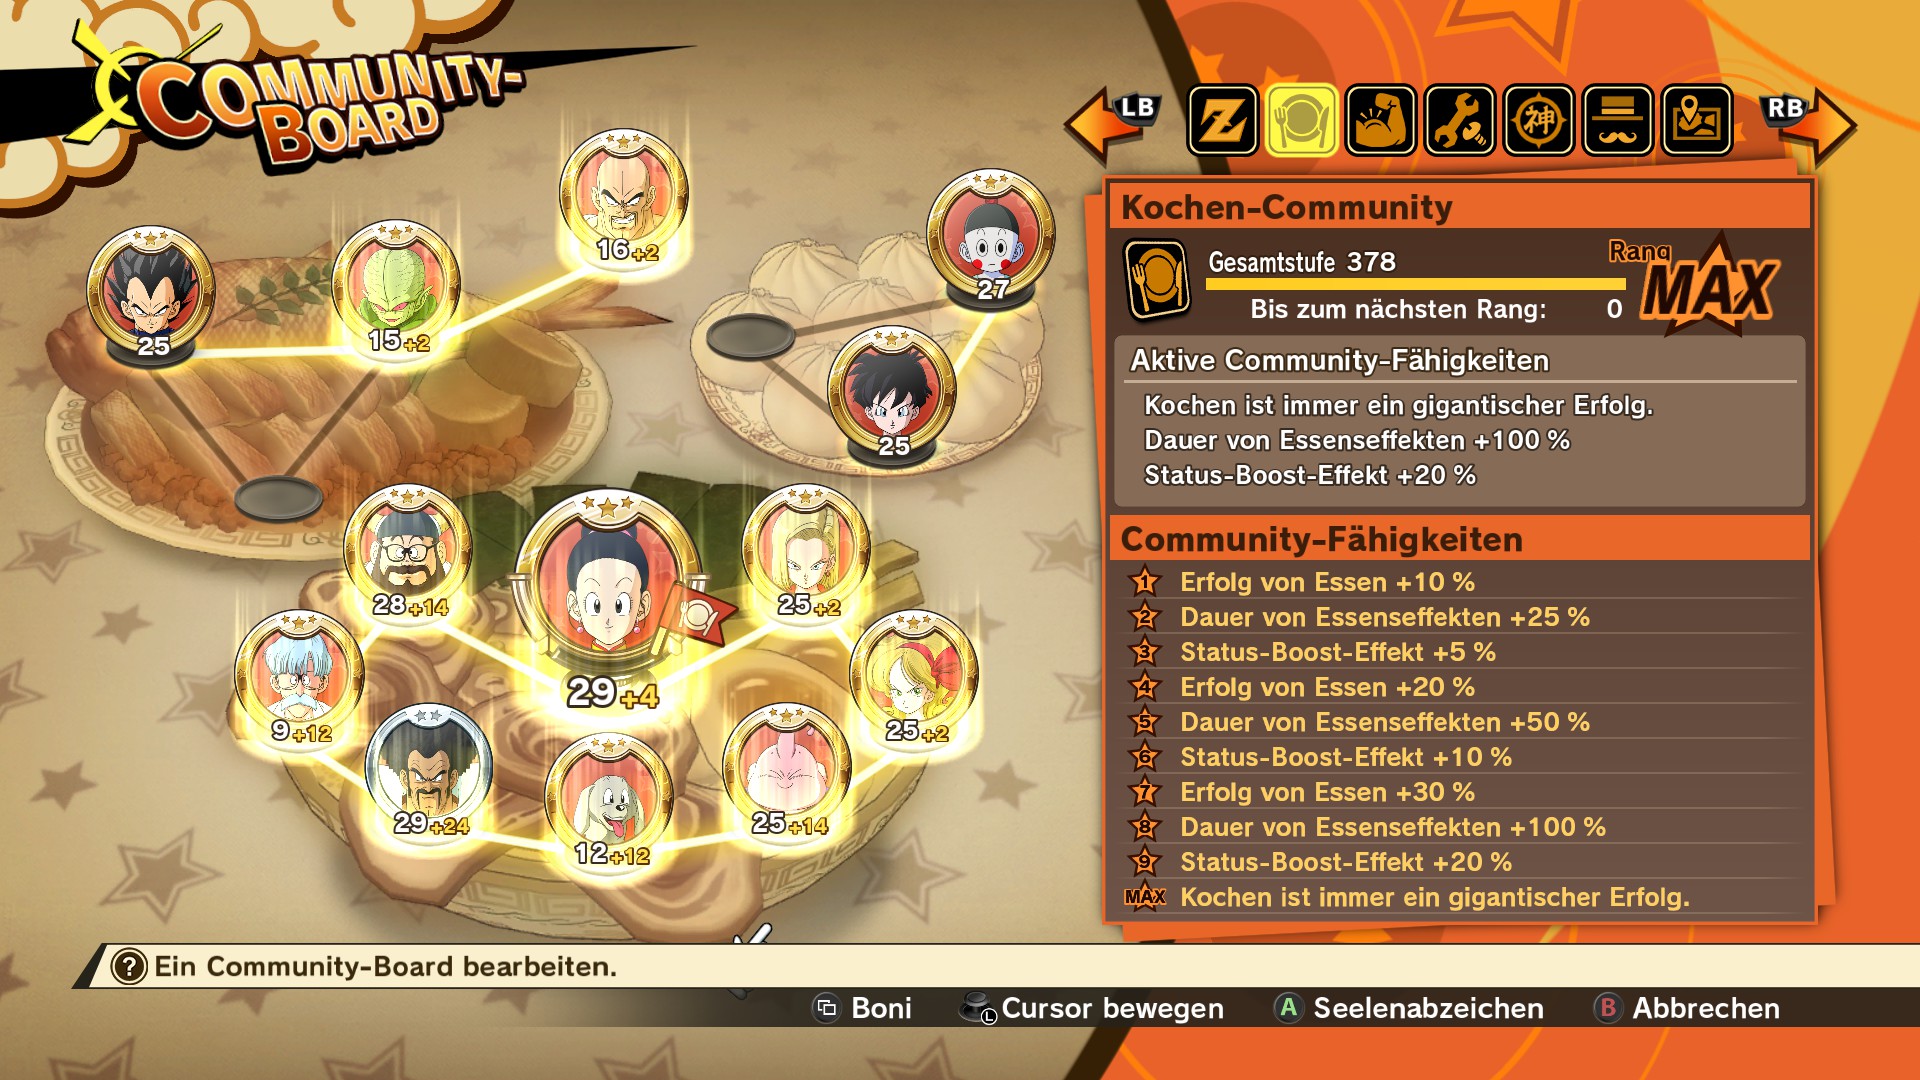 DRAGON BALL Z: KAKAROT Community Boards Information in Game - Cooking Community Board